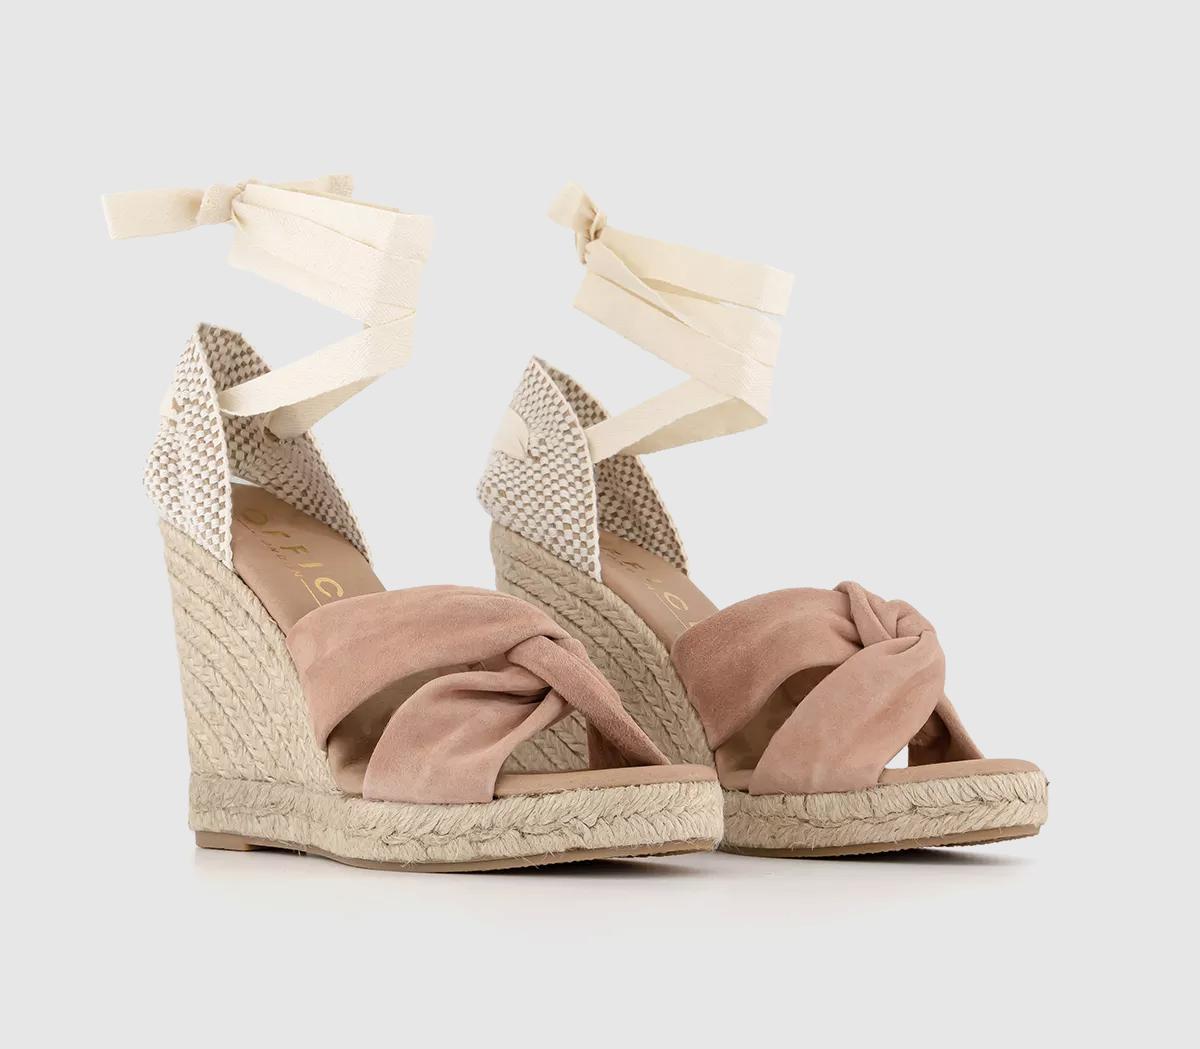 OFFICE Womens Heather Ankle Tie Espadrilles Blush Suede Natural, 7